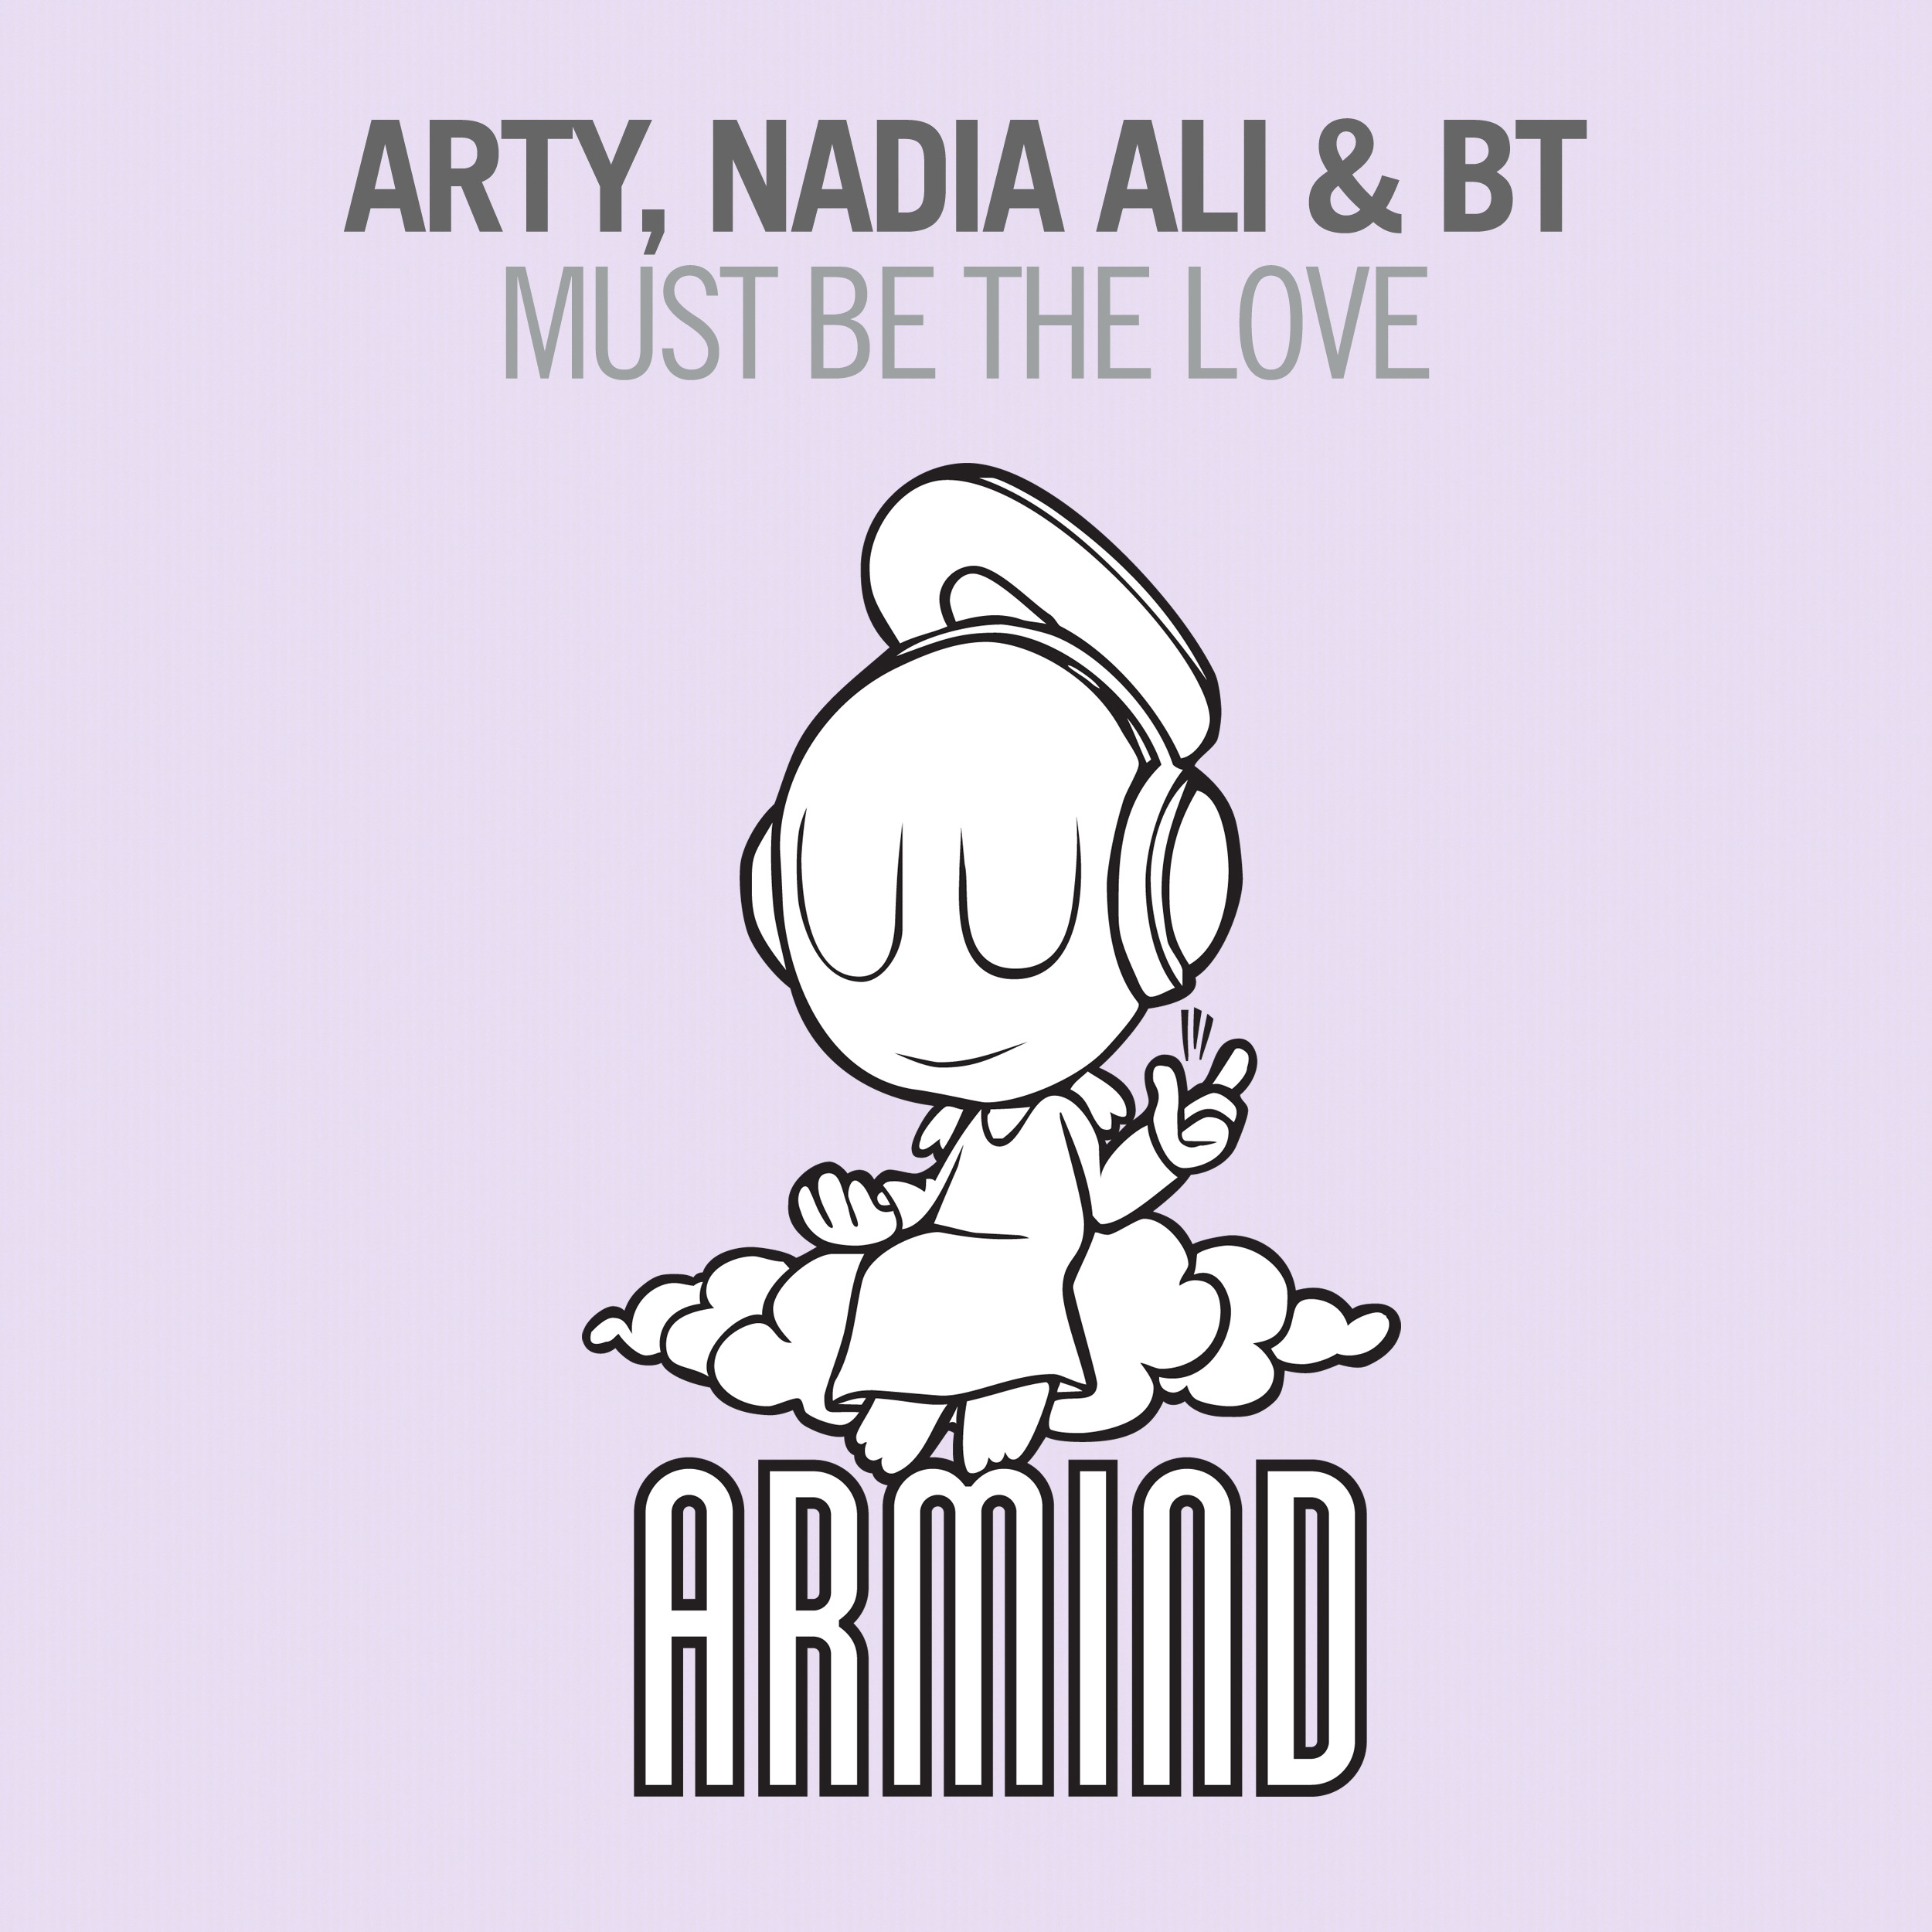 BT & ARTY ft. featuring Nadia Ali Must Be The Love cover artwork